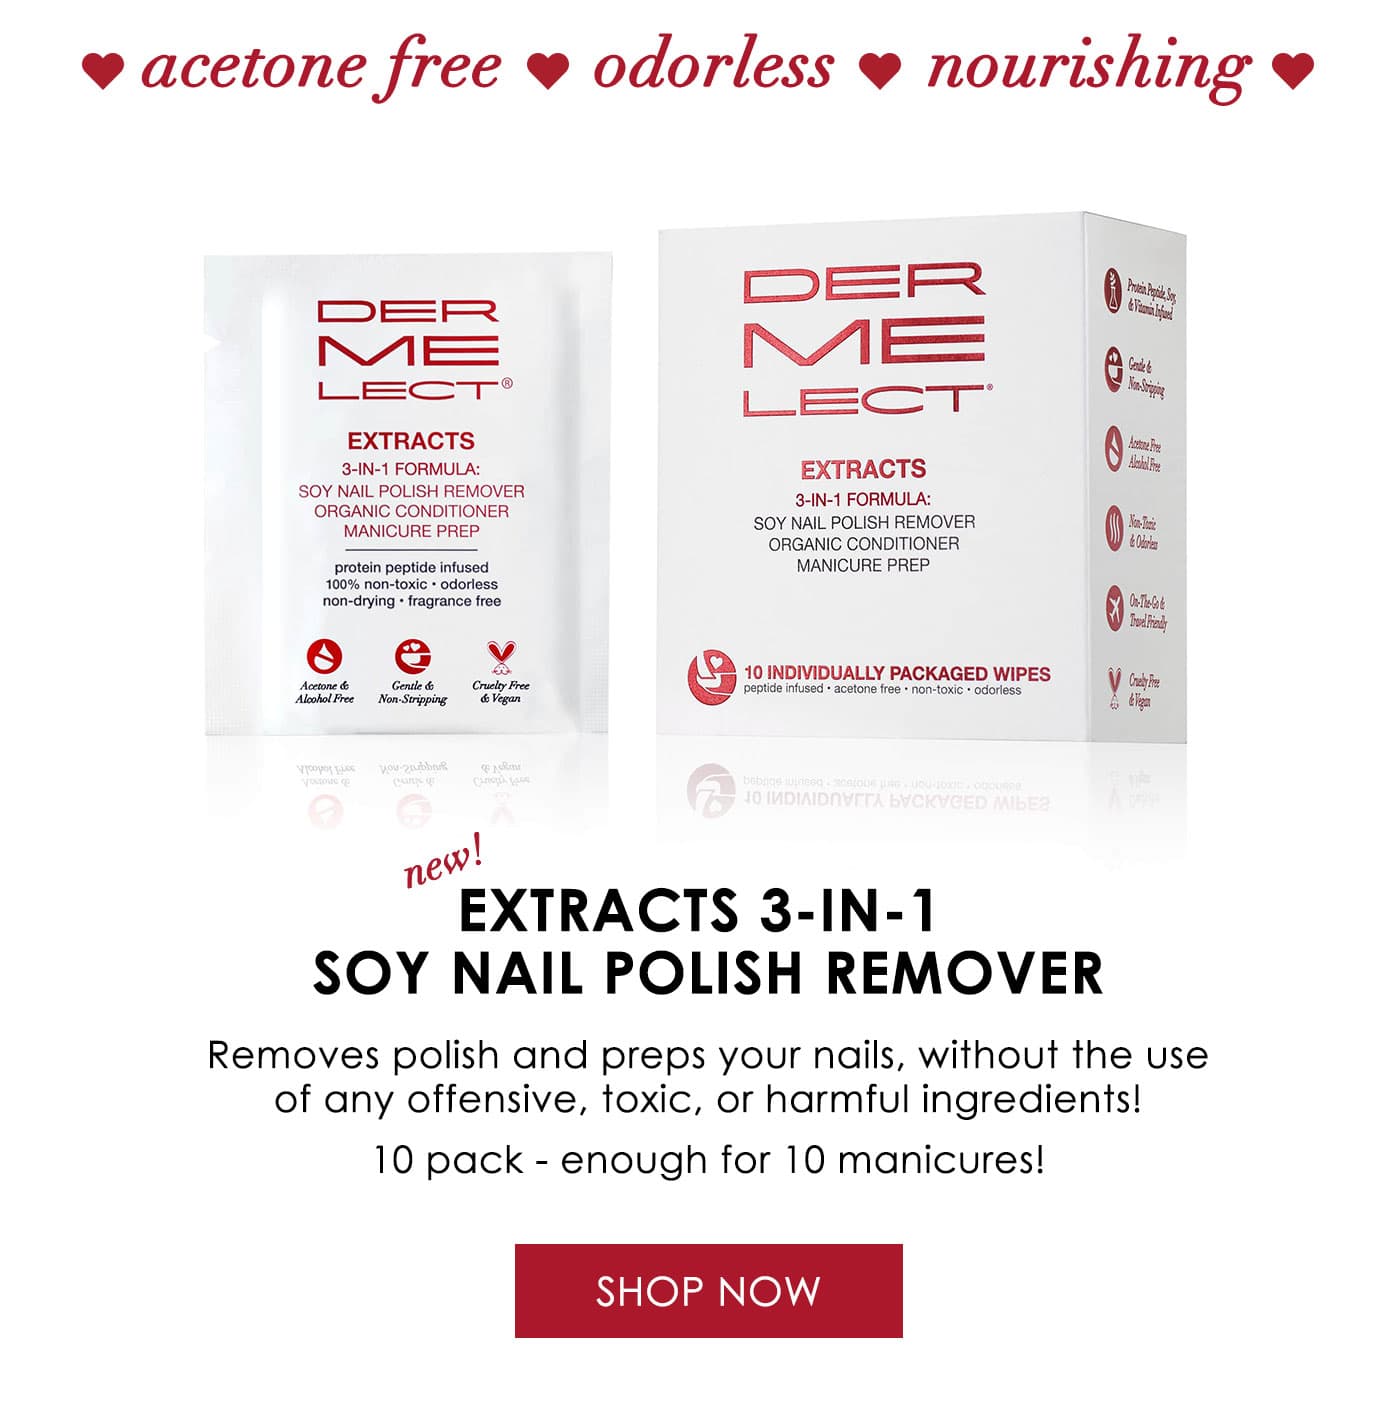 EXTRACTS 3-in-1 Soy Nail Polish Remover